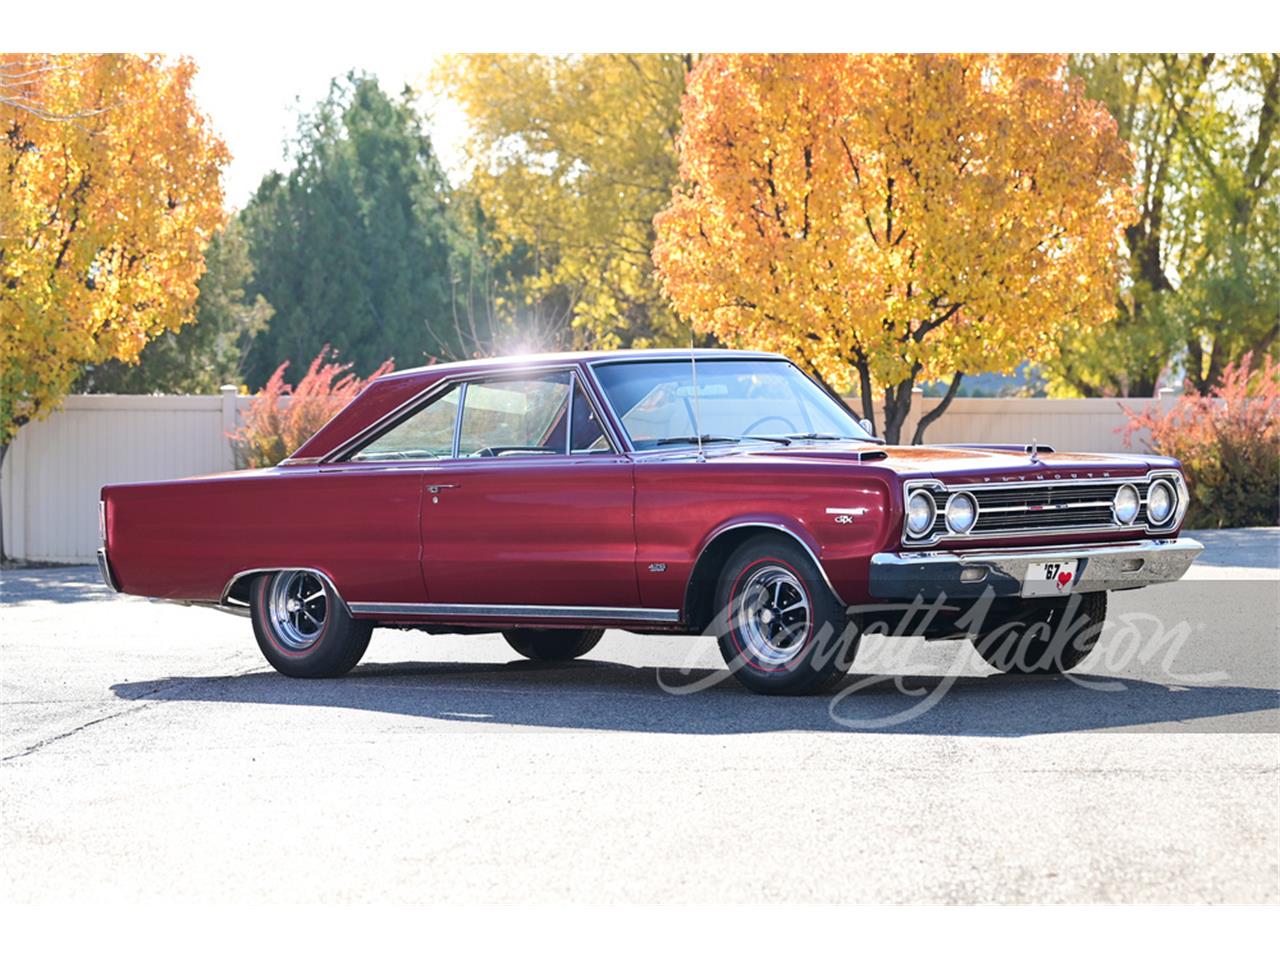 For Sale at Auction: 1967 Plymouth GTX in Scottsdale, Arizona for sale in Scottsdale, AZ